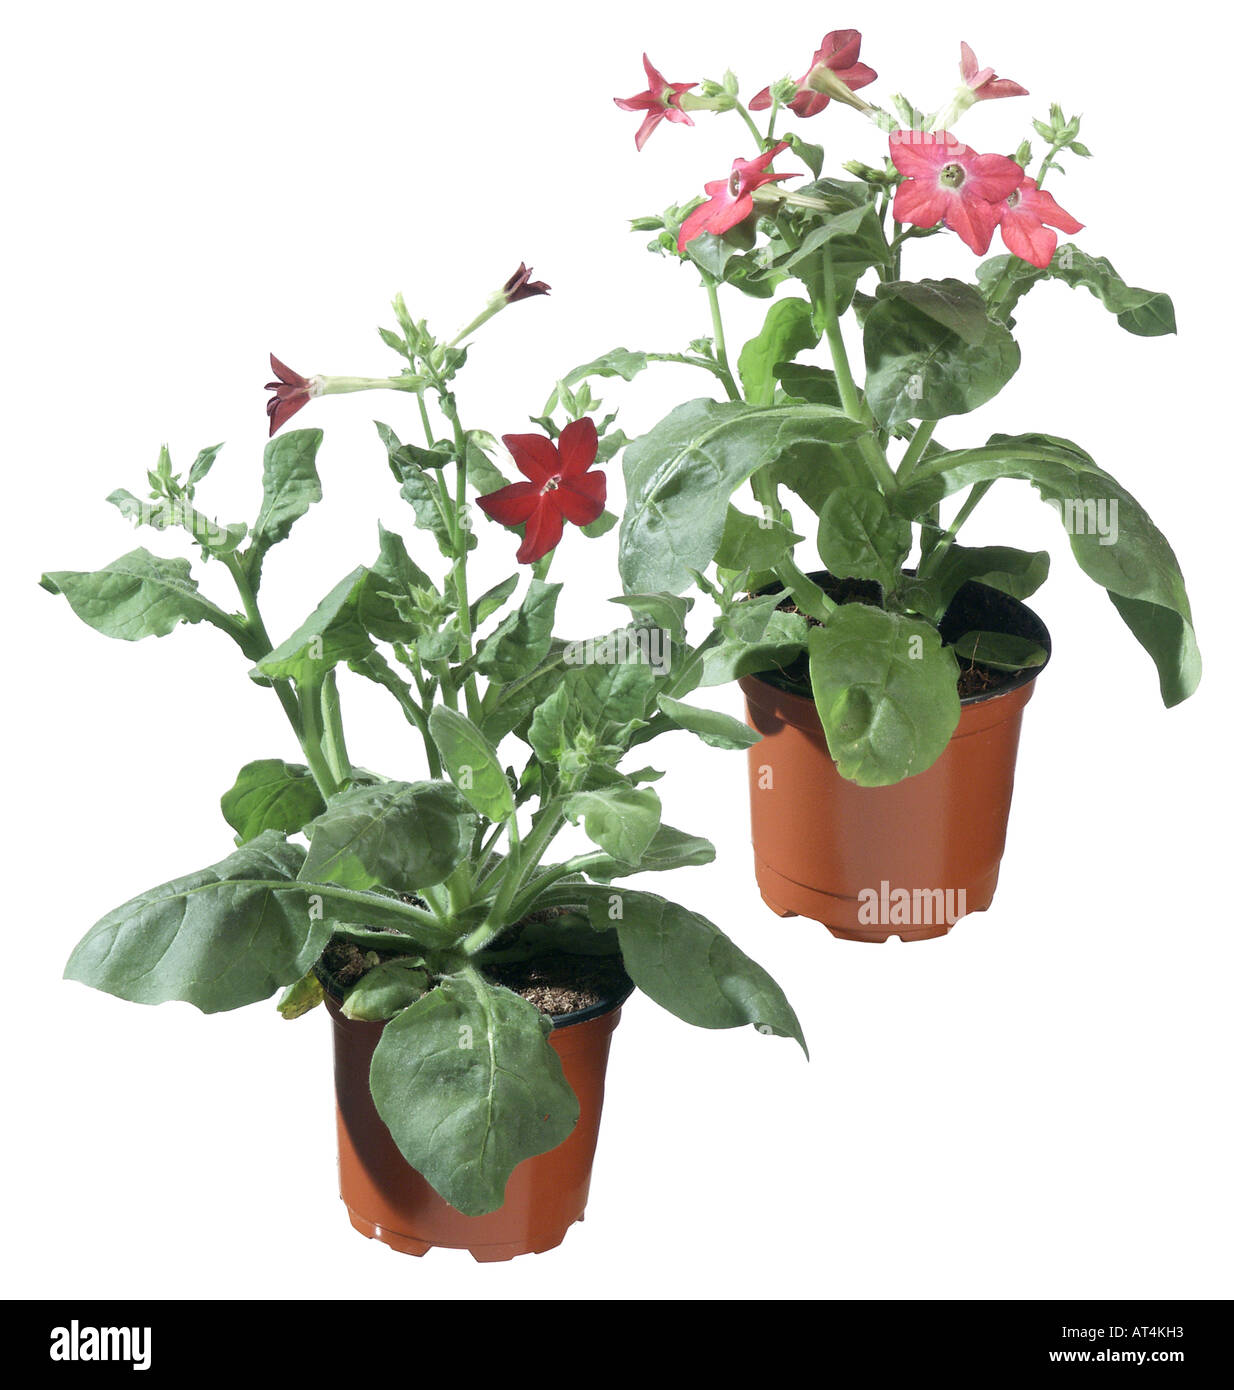 Flowering Tobacco (Nicotiana x sanderae, Nicotiana sanderae), potted plants, different cultivars Stock Photo